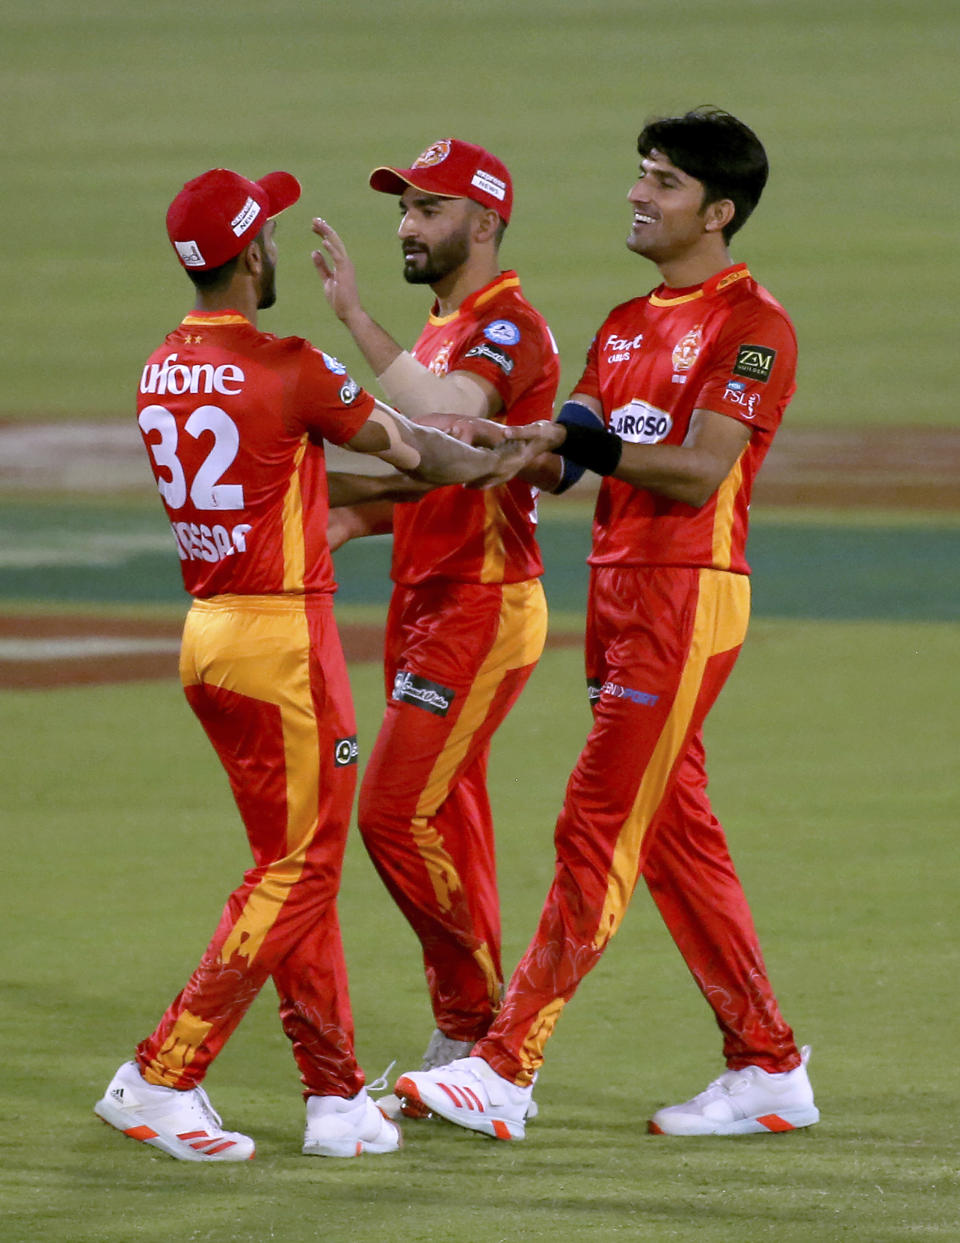 Islamabad United's Mohammad Wasim, right, celebrates with teammates after taking the wicket of Multan Sultans' Shahid Afridi during a Pakistan Super League T20 cricket match between Multan Sultans and Islamabad United at the National Stadium, in Karachi, Pakistan, Sunday, Feb. 21 2021. (AP Photo/Fareed Khan)